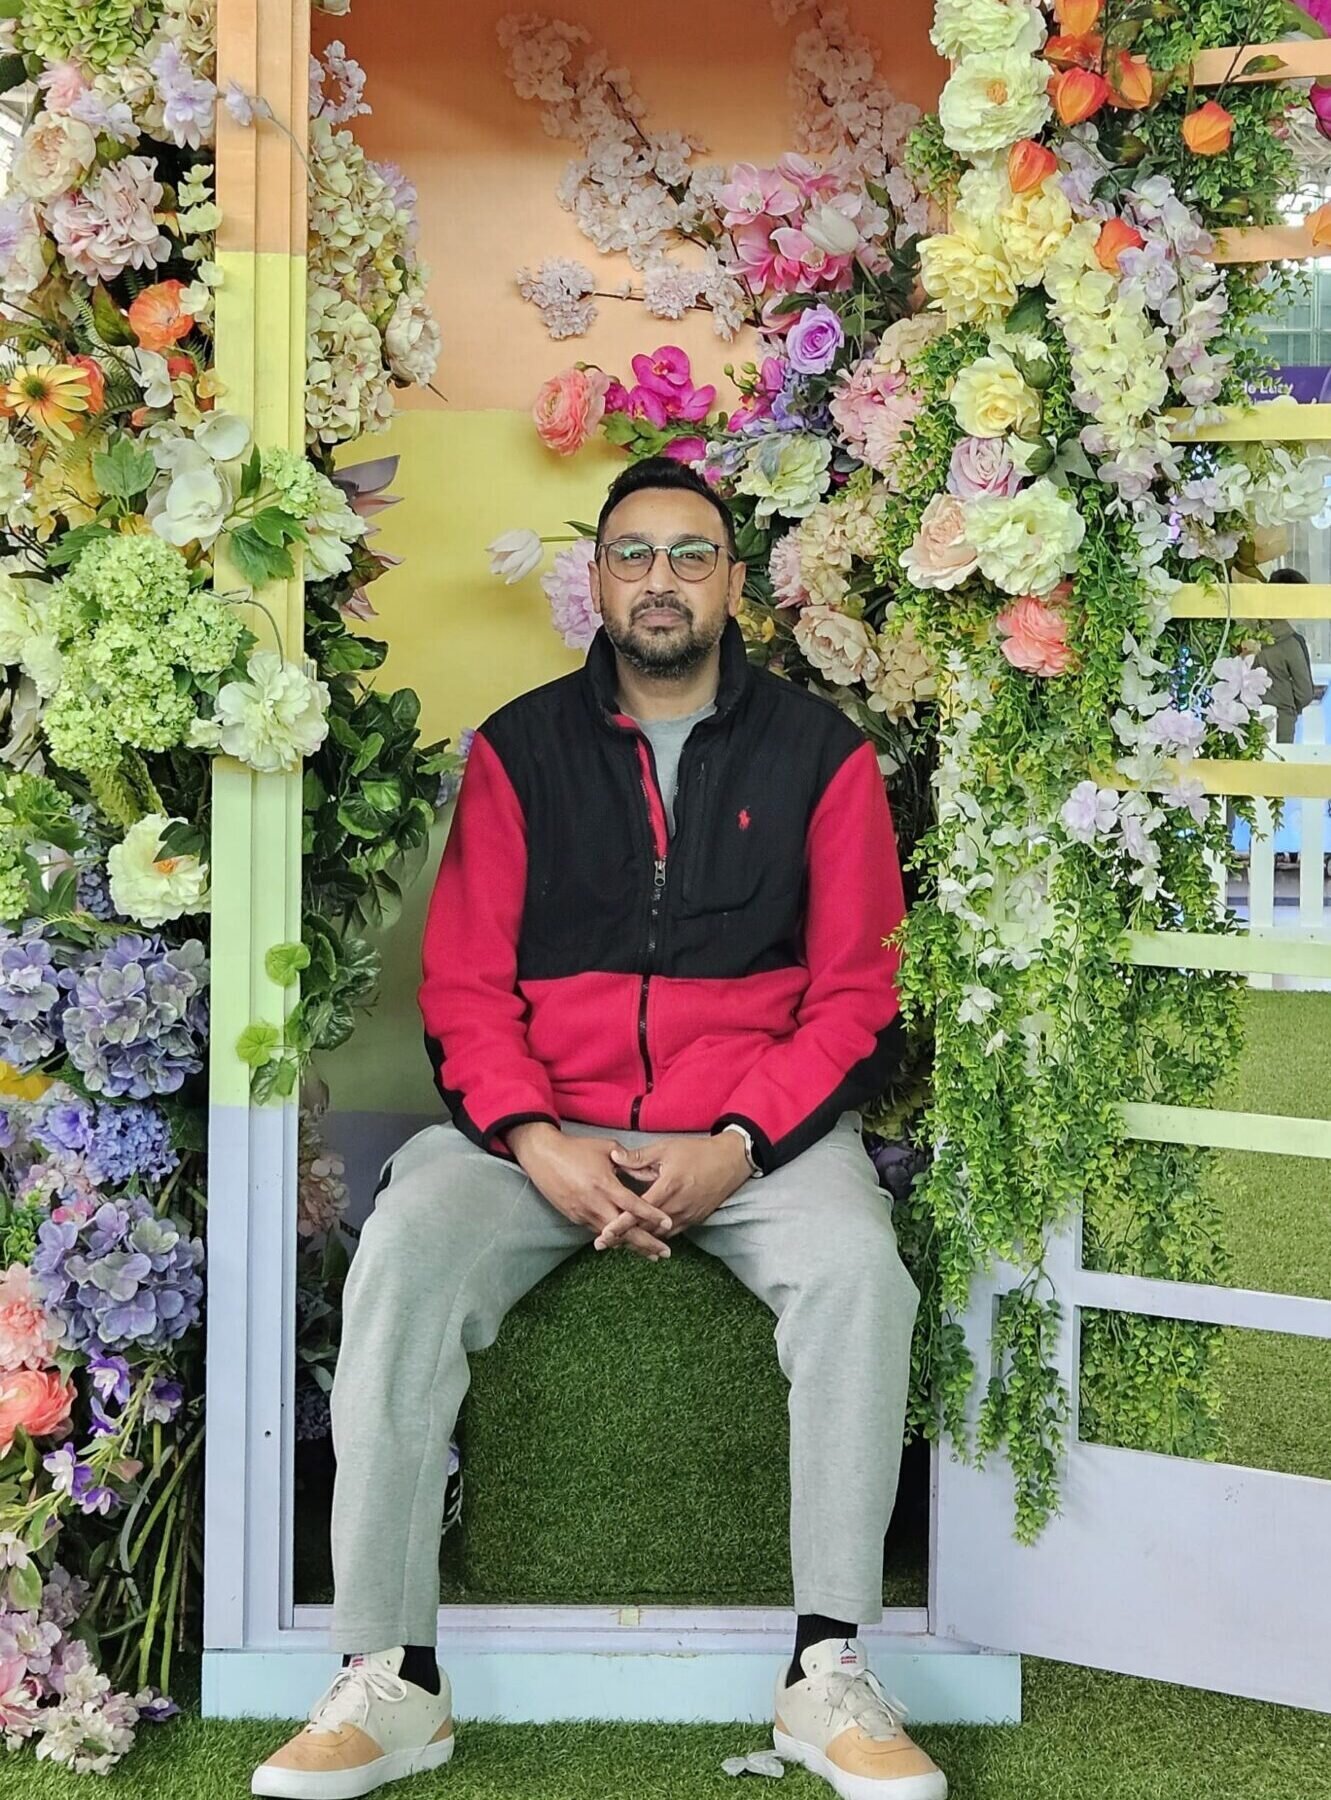 Mohammad poses seated in a telephone box brightly decorated with beautiful flowers.